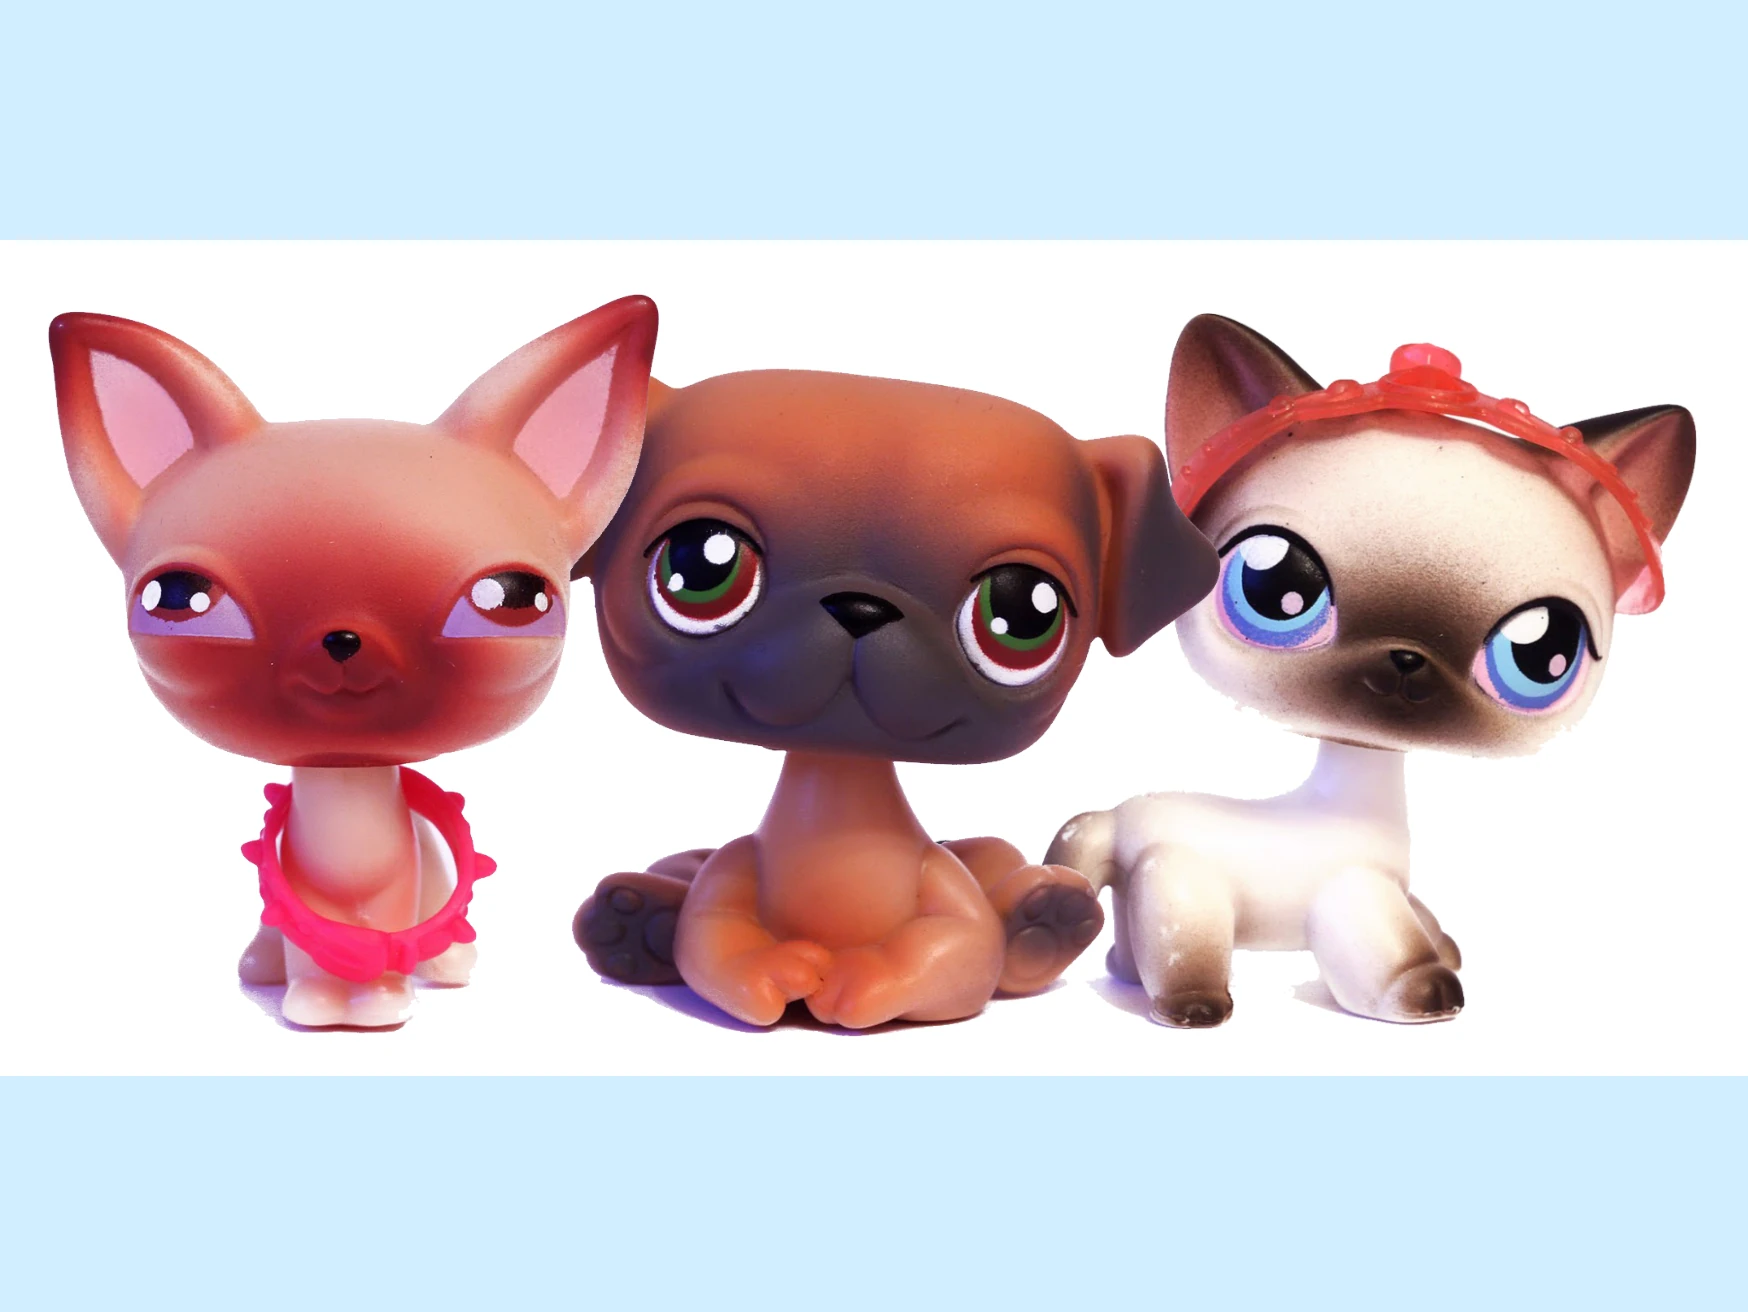 https://static.wikia.nocookie.net/the-littlest-pet-shop-wikia/images/2/2e/Lps-g2-1.jpg/revision/latest?cb=20230815173601